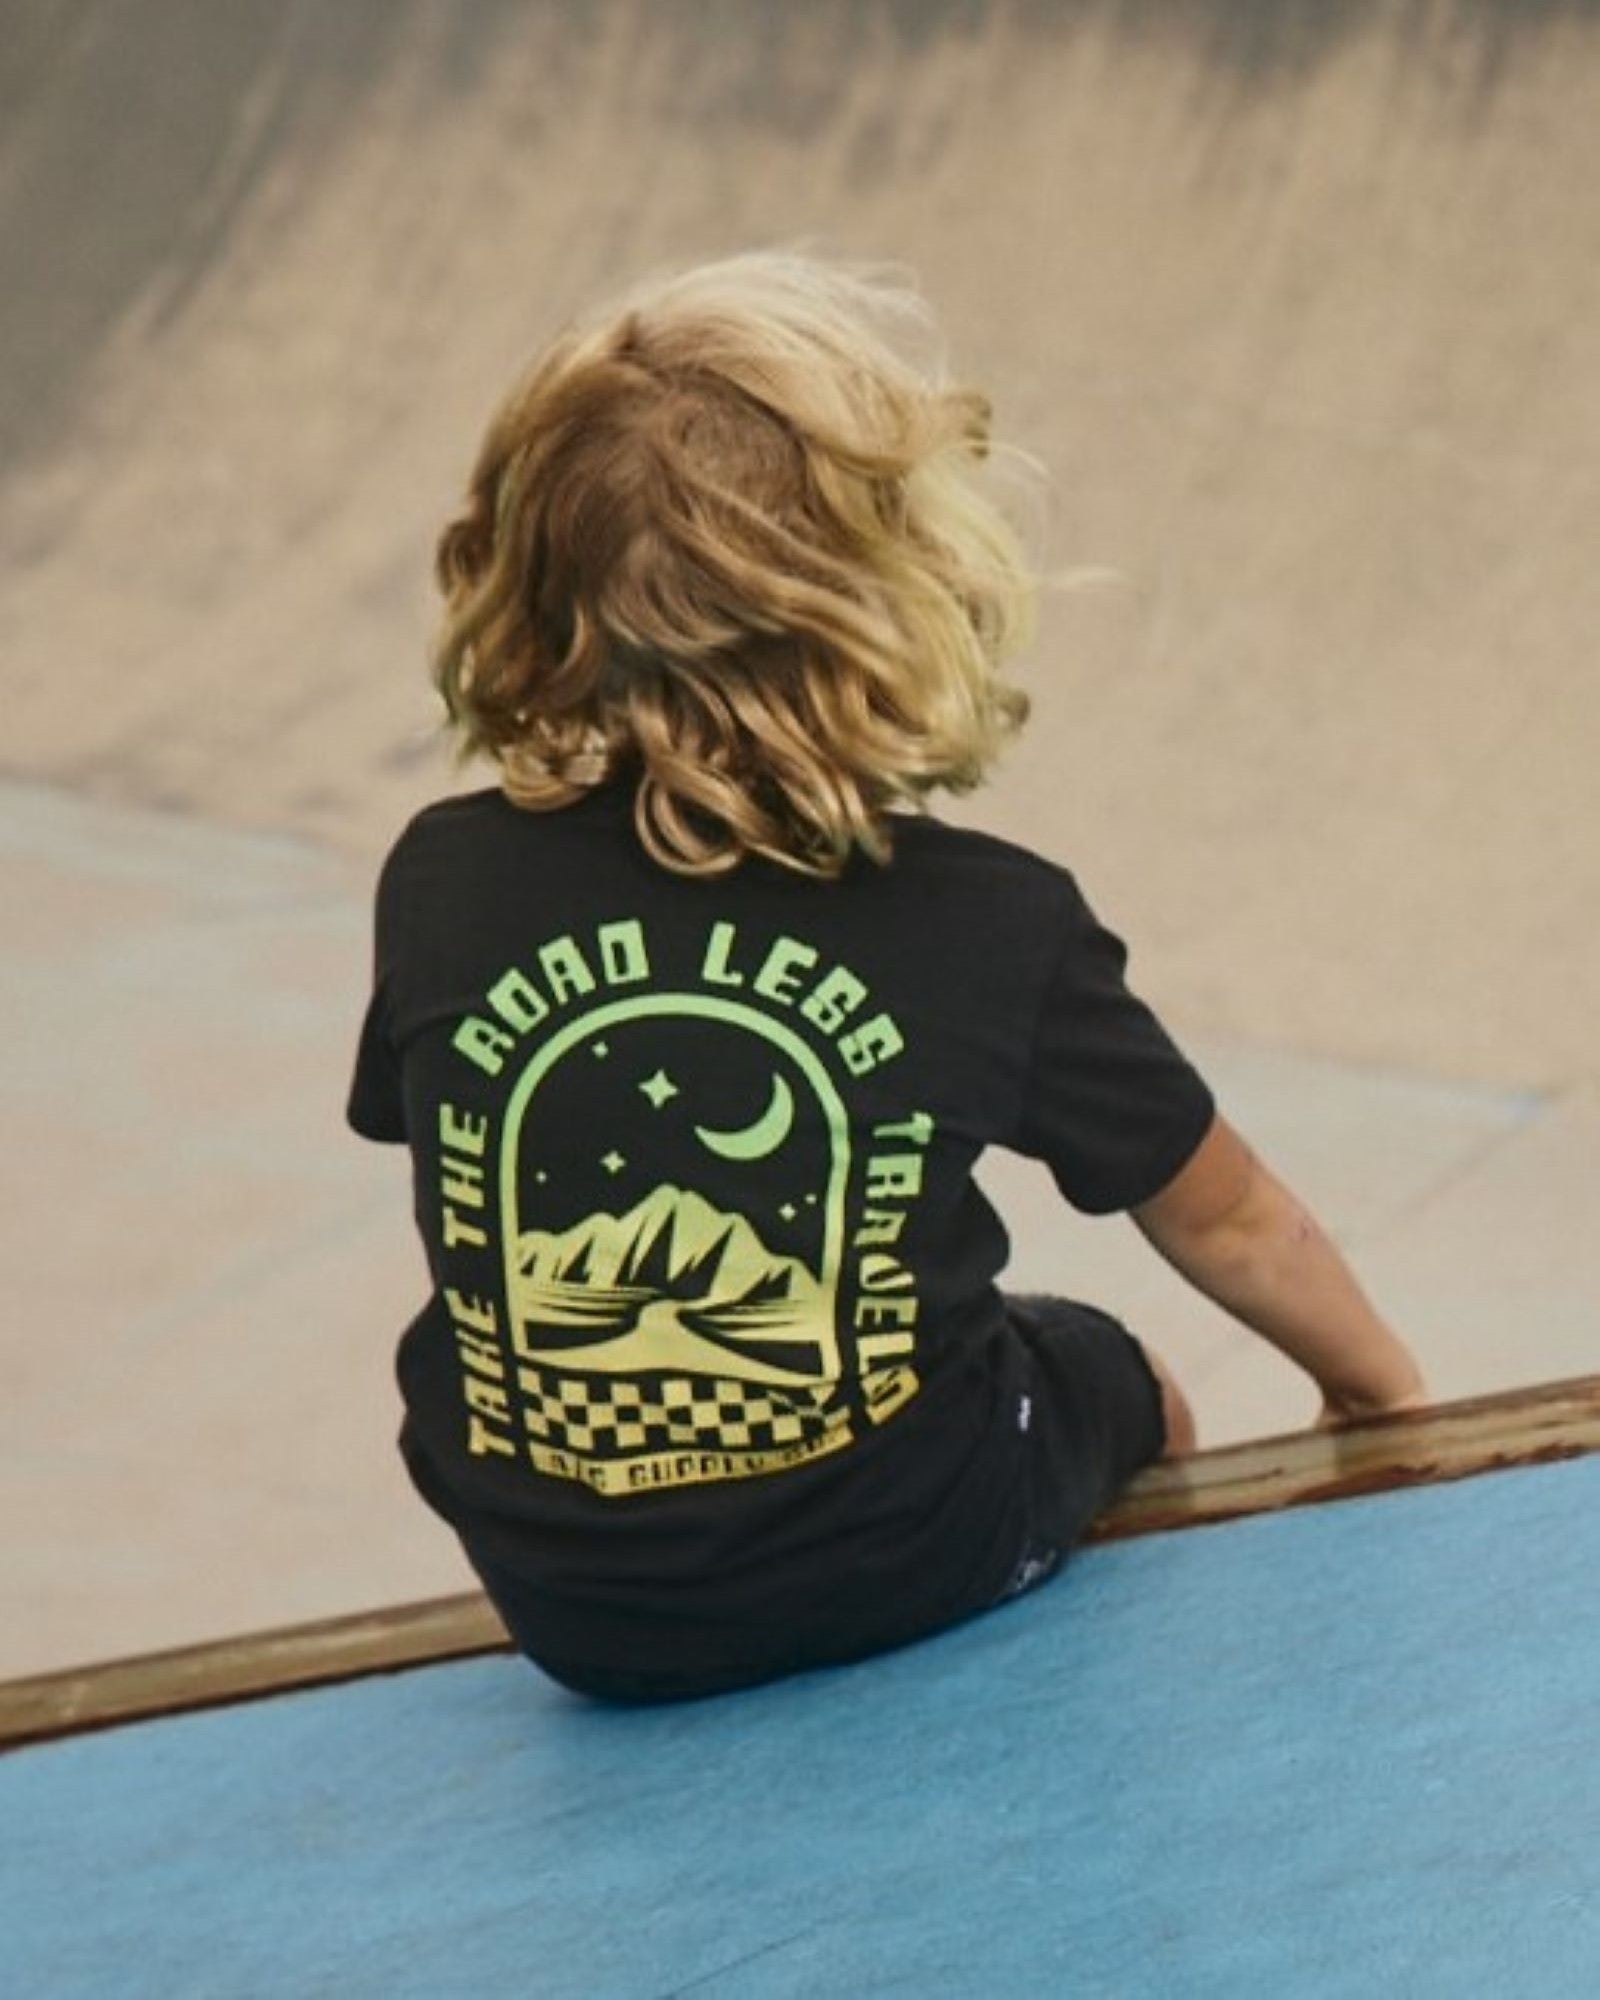 Alphabet Soup's Teen Mystical Tee in washed black cotton jersey for boys ages 8-16. Featuring a rad print “Take The Road Less Travelled” design on front and back, short sleeves, crew neck, and straight hemline.